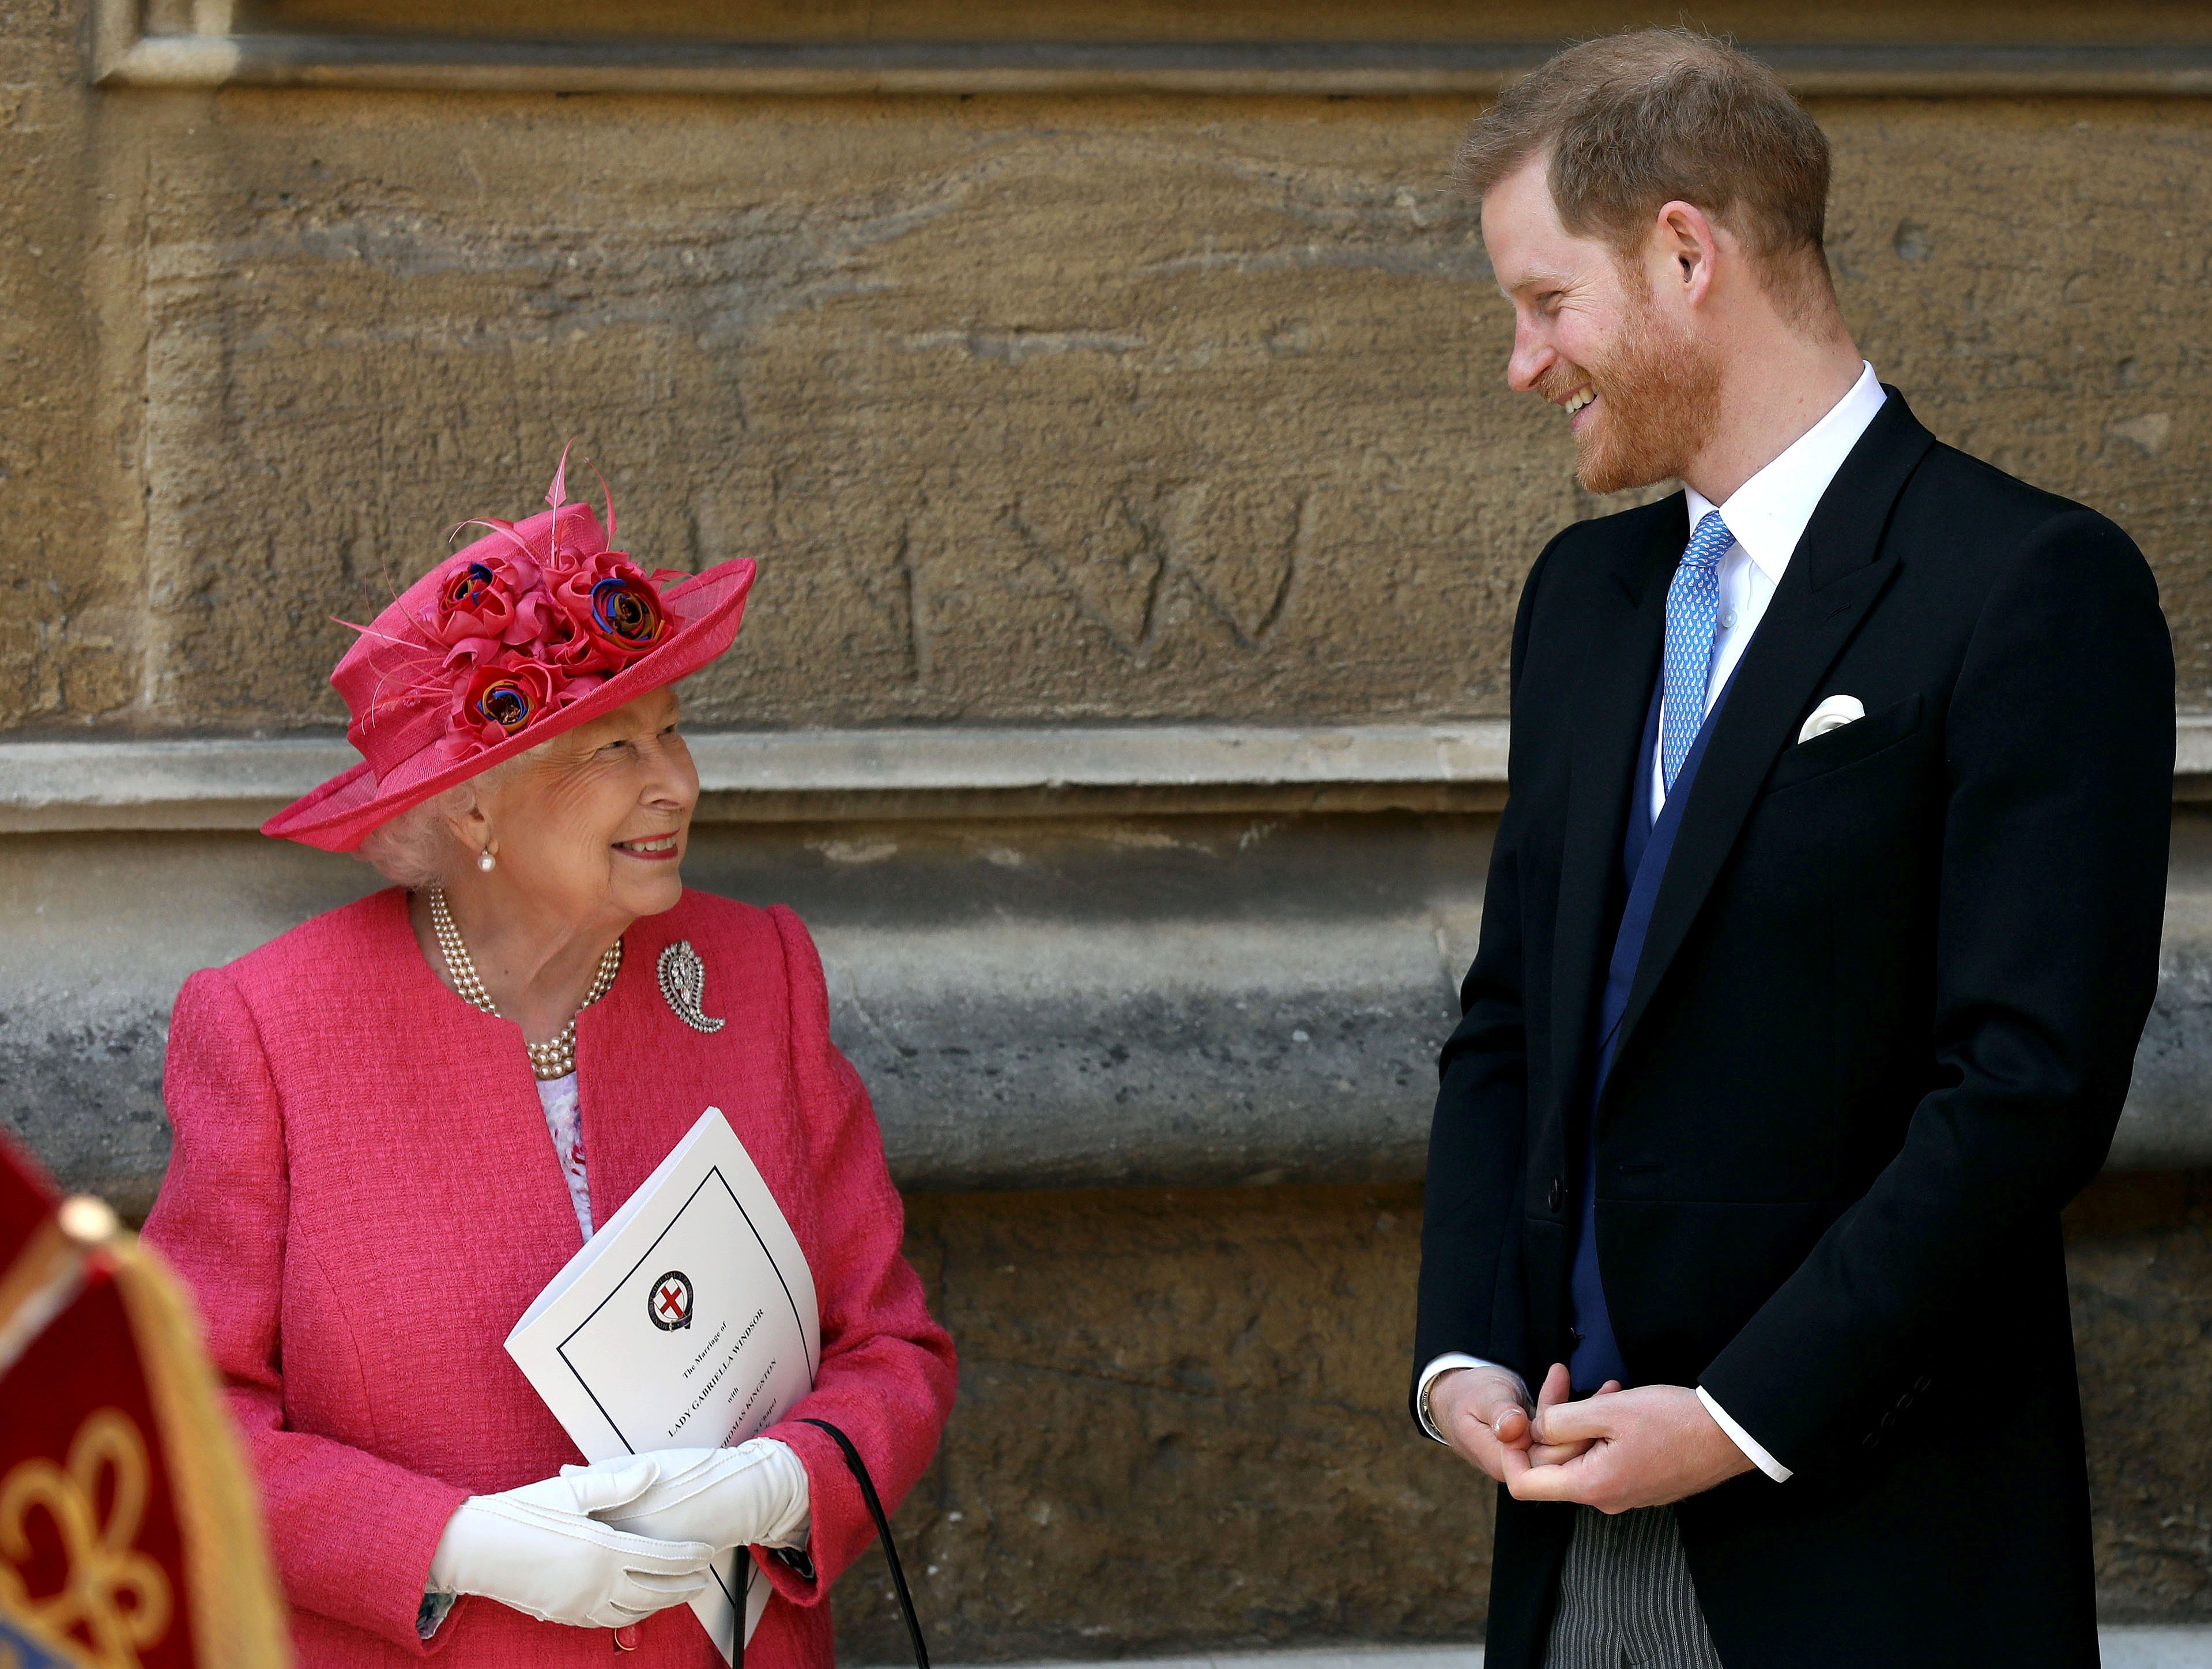 Queen Elizabeth II and Prince Harry pictured at the St George's Chapel in Windsor Castle on on May 18, 2019 in Windsor, London. / Source: Getty Images